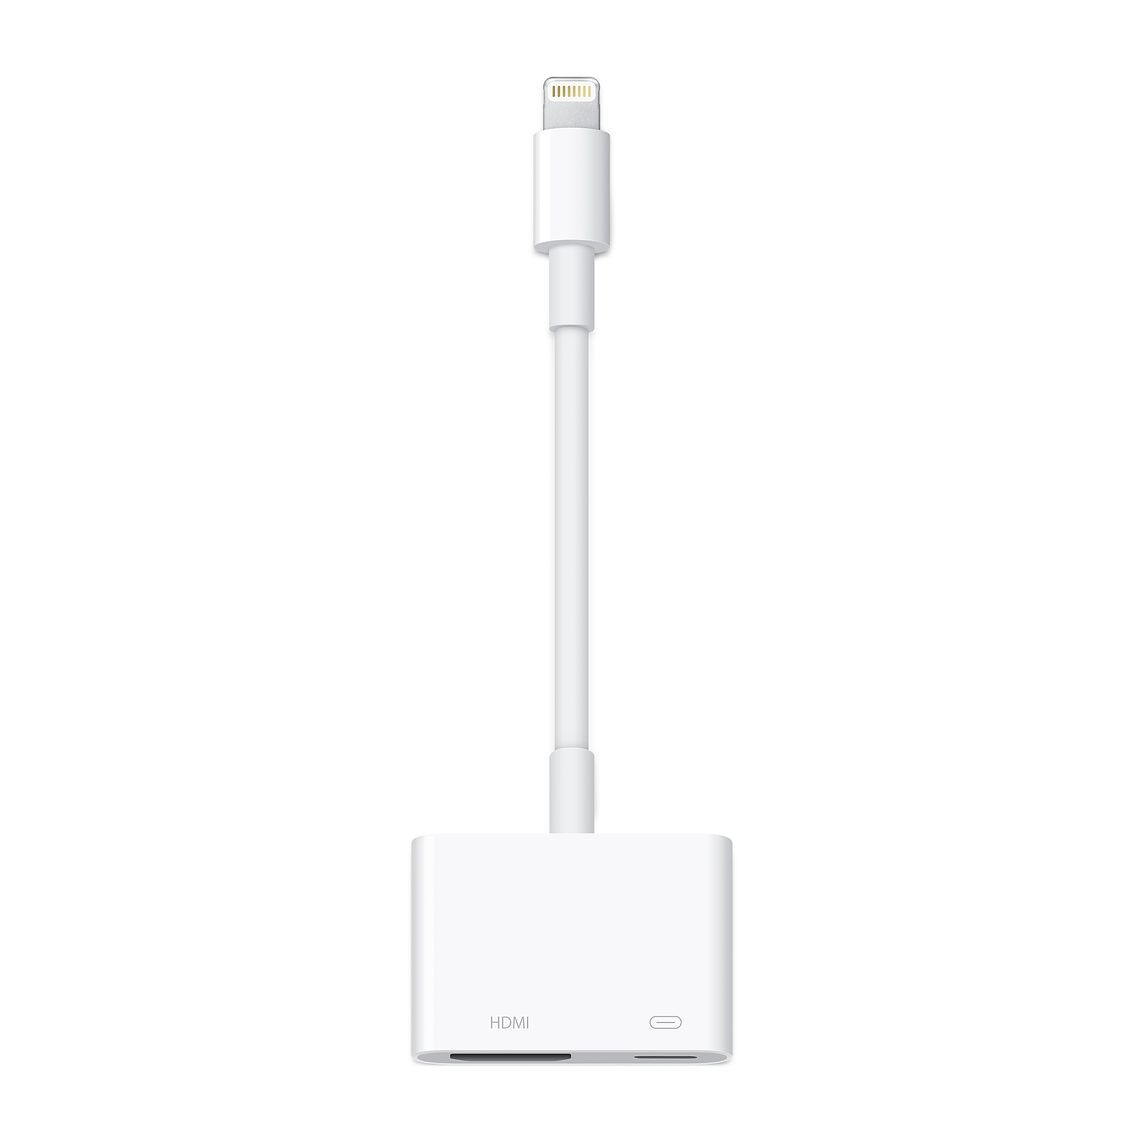 Apple's Lightning to HDMI adapter - How to connect an iPhone or iPad to a TV or a computer monitor